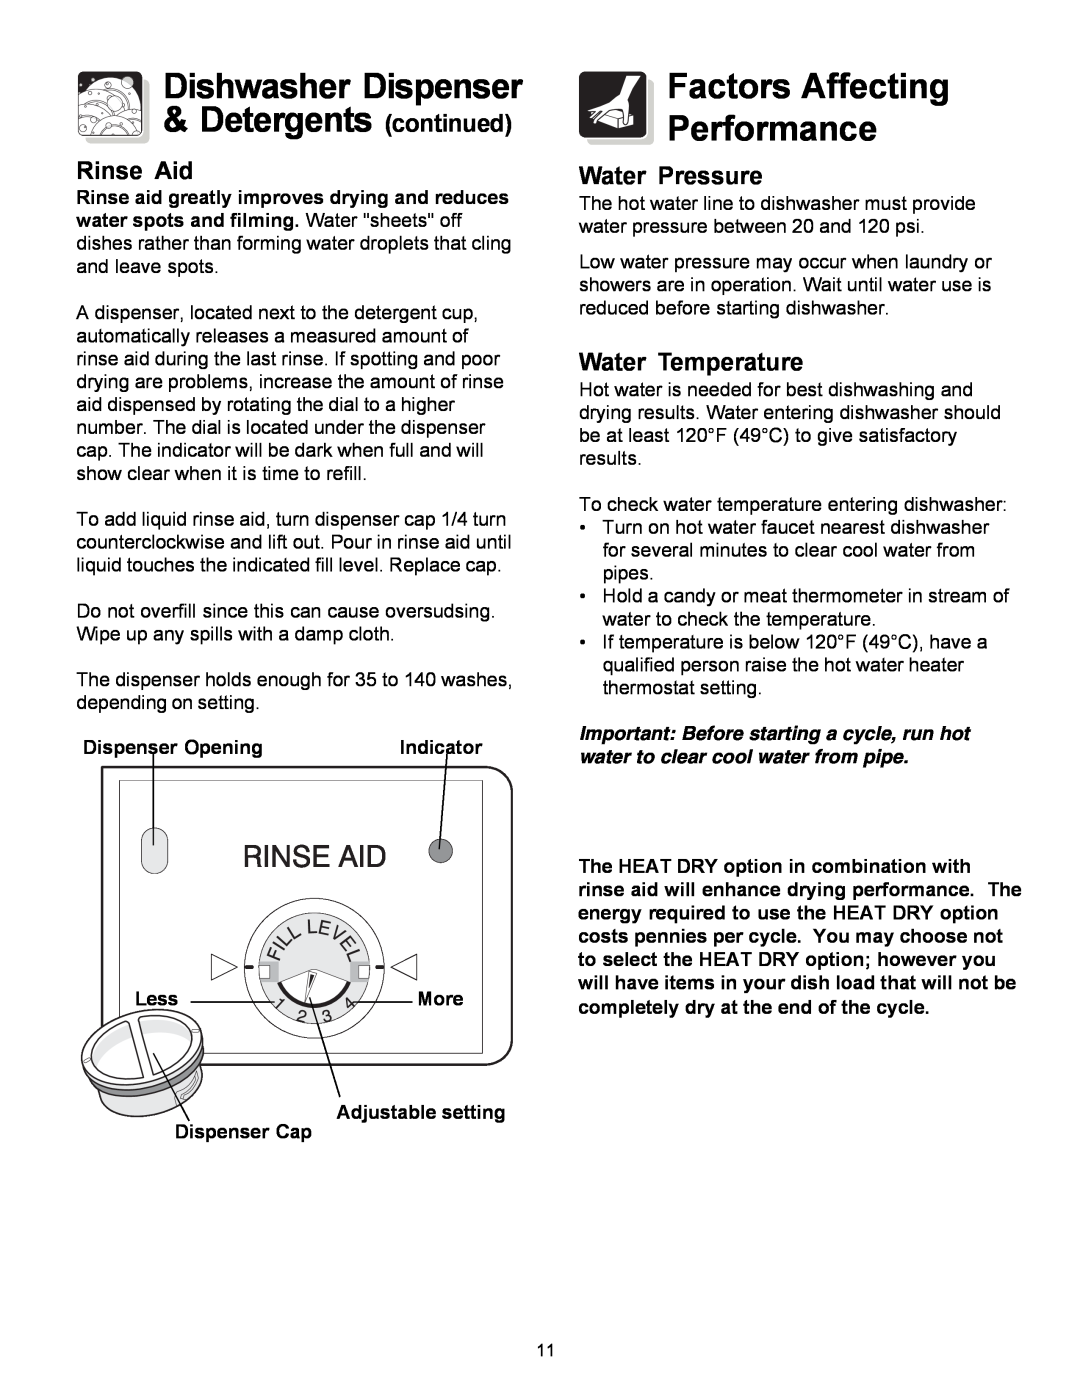 Frigidaire 1000 Series Dishwasher Dispenser Detergents continued, Factors Affecting Performance, Rinse Aid, Water Pressure 